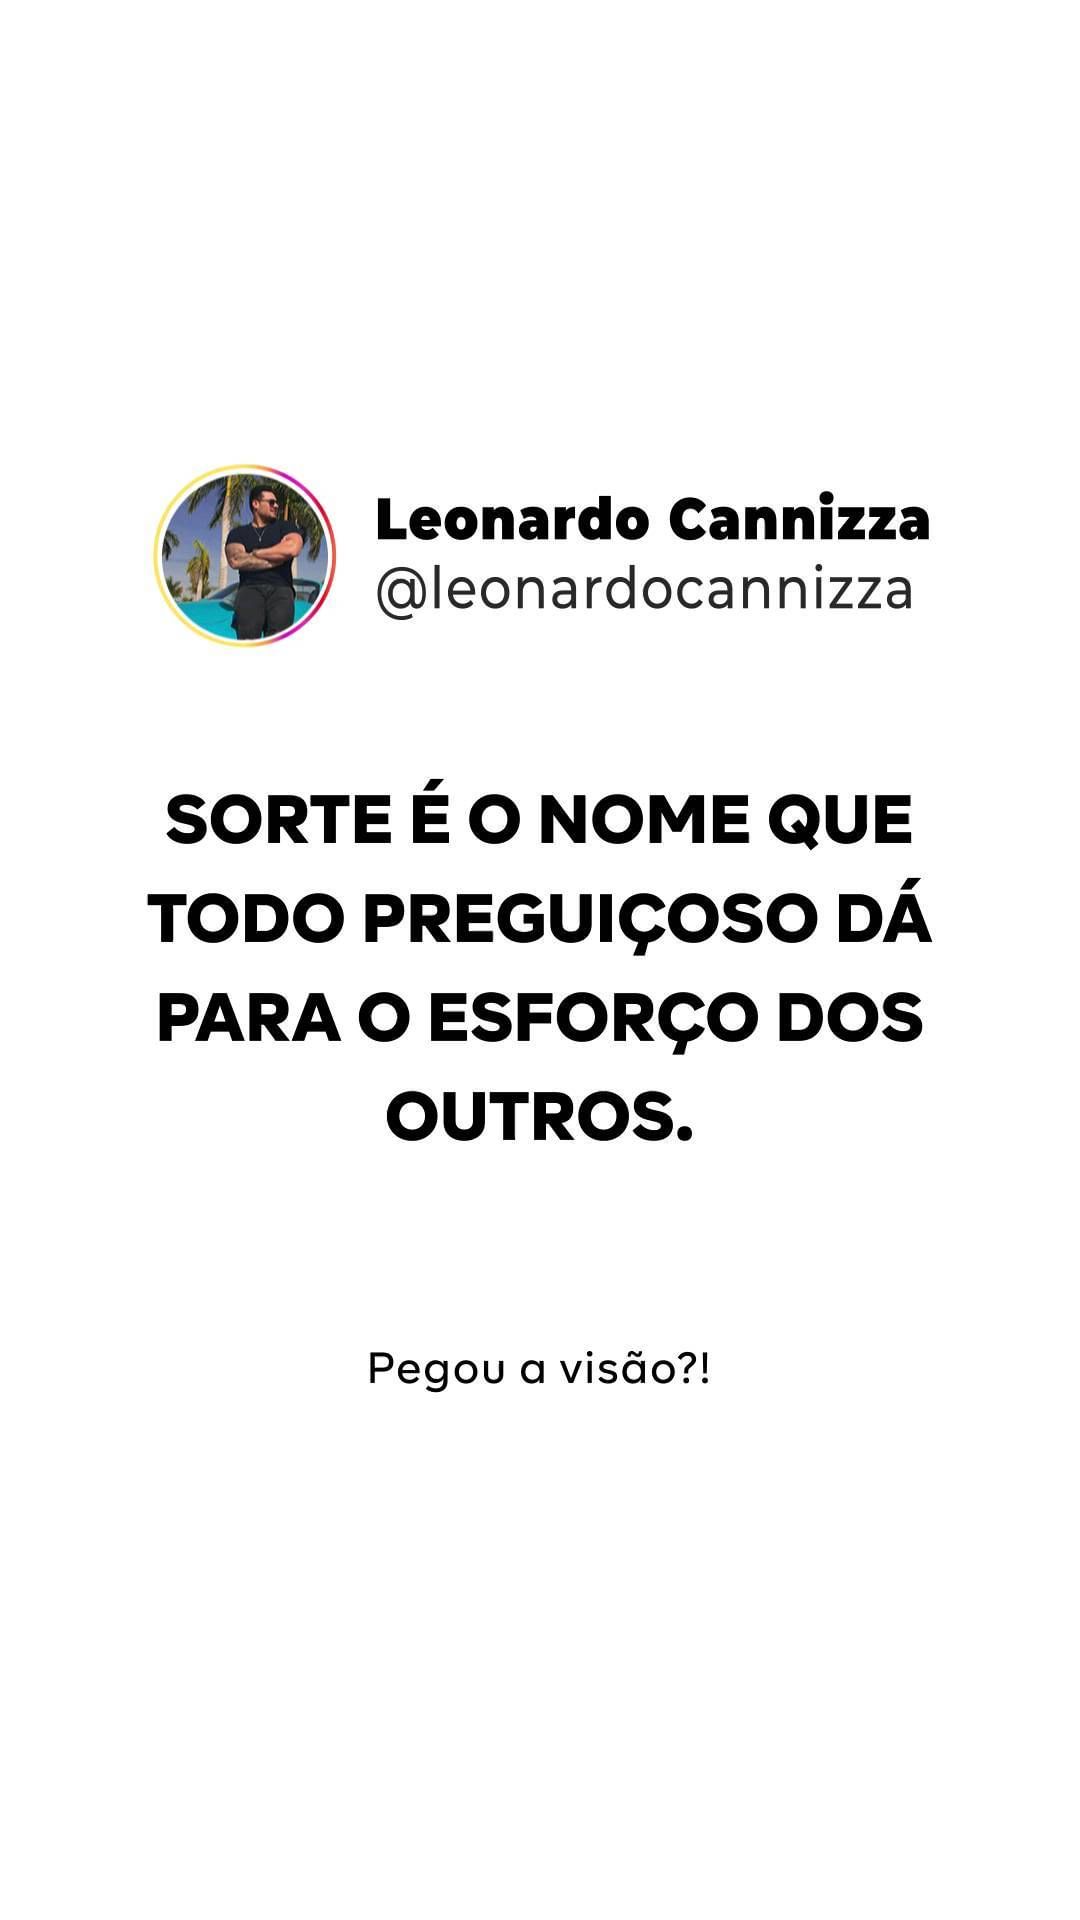 One of the top publications of @leonardocannizza which has 103 likes and 8 comments